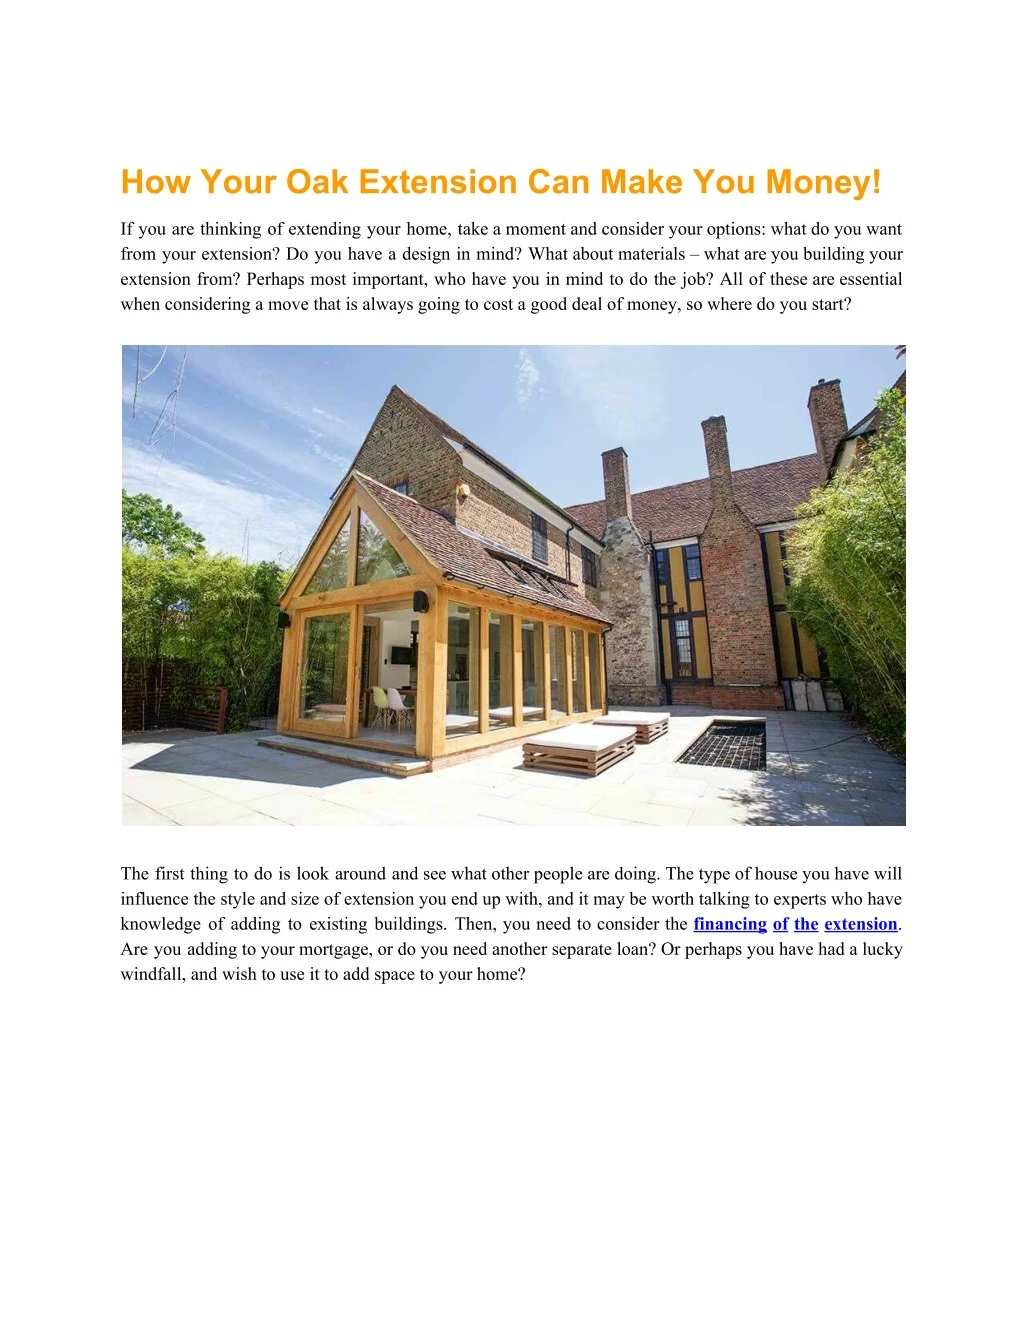 how your oak extension can make you money